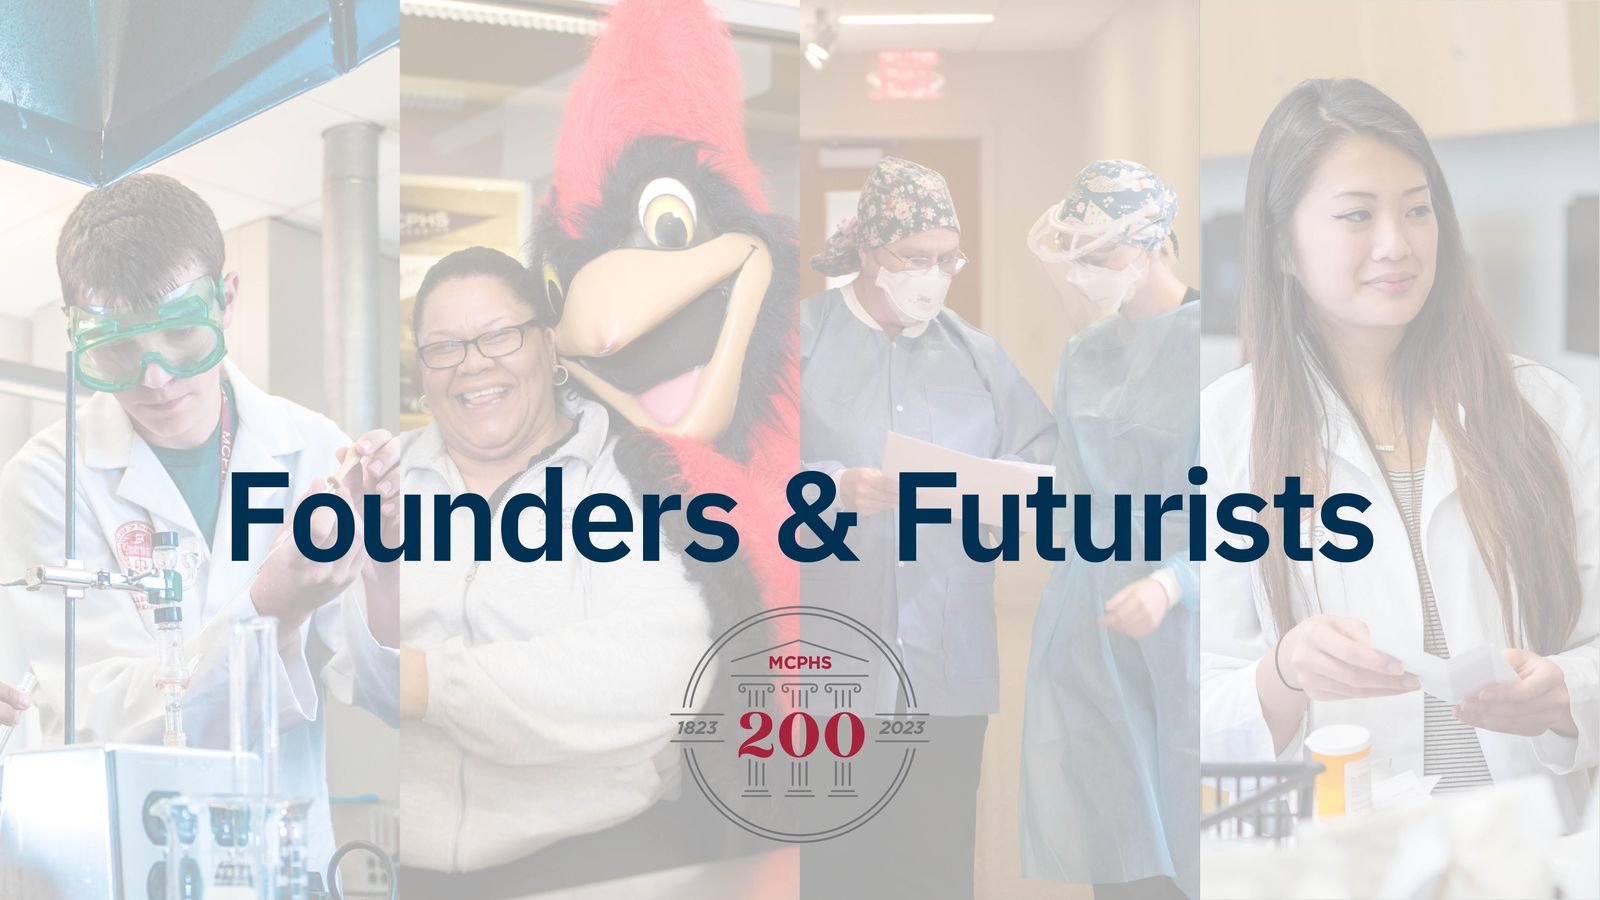 Video title Screen: Founders and Futurists